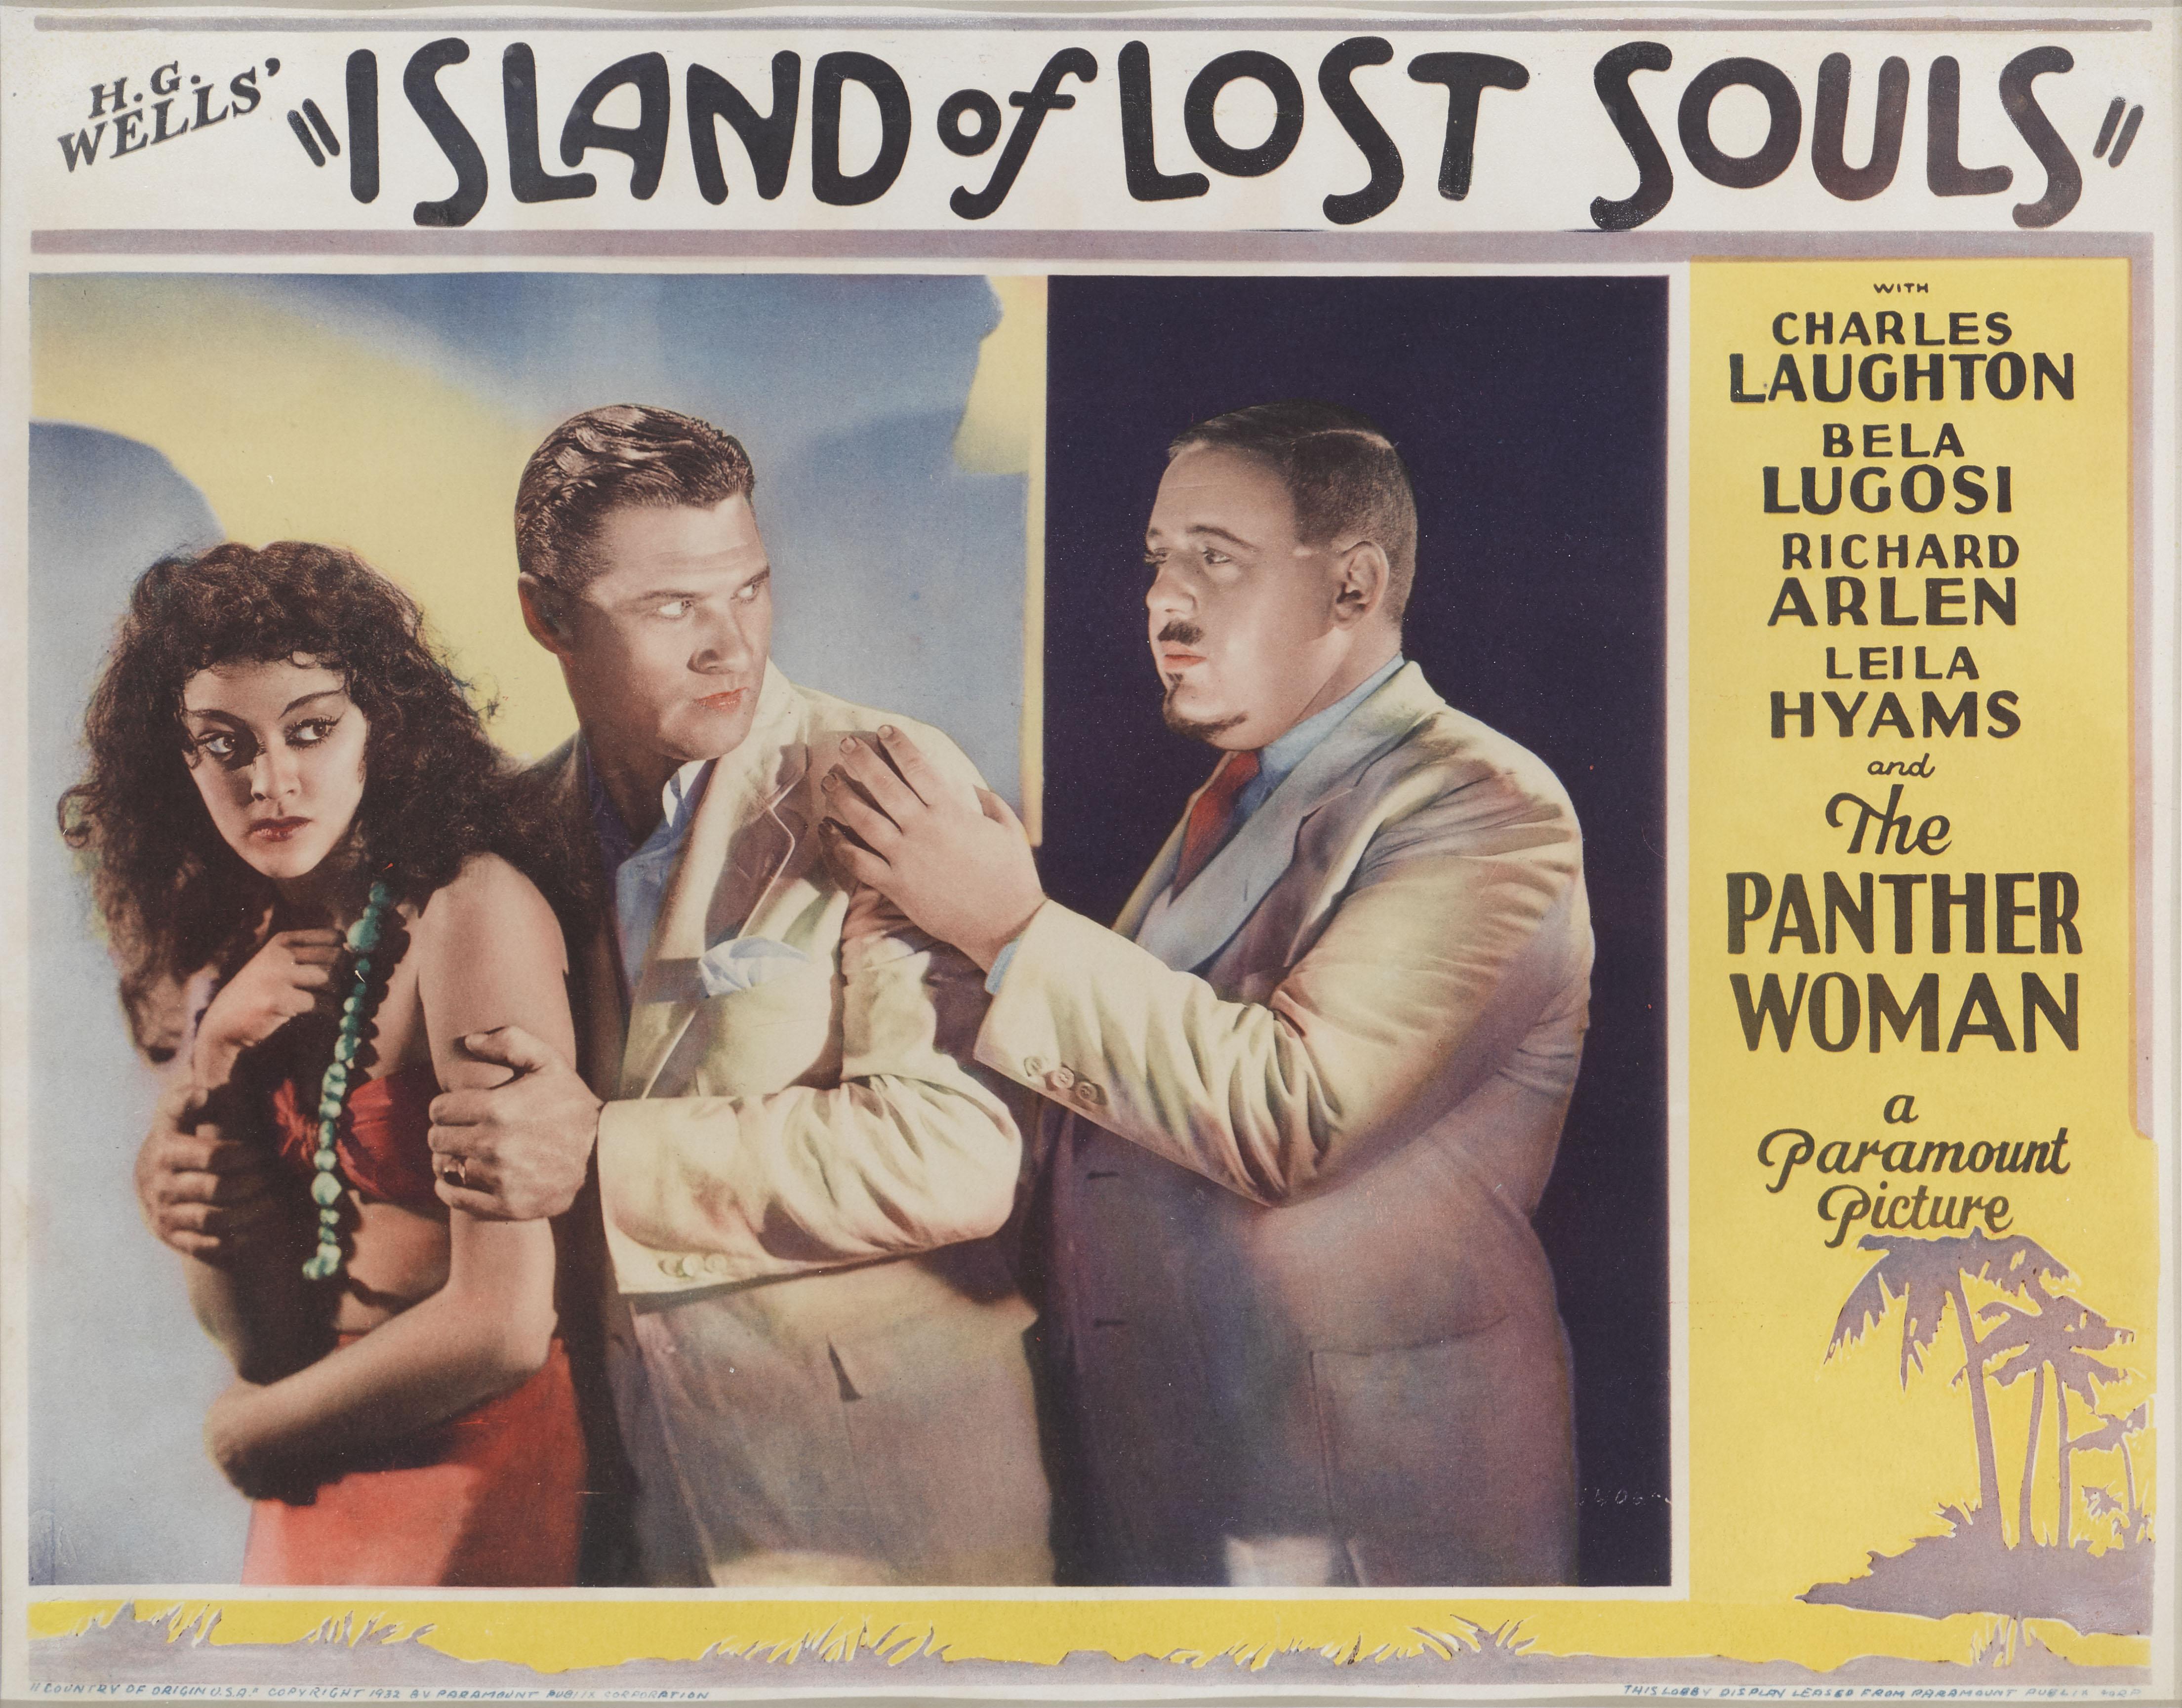 American Island of Lost Souls For Sale